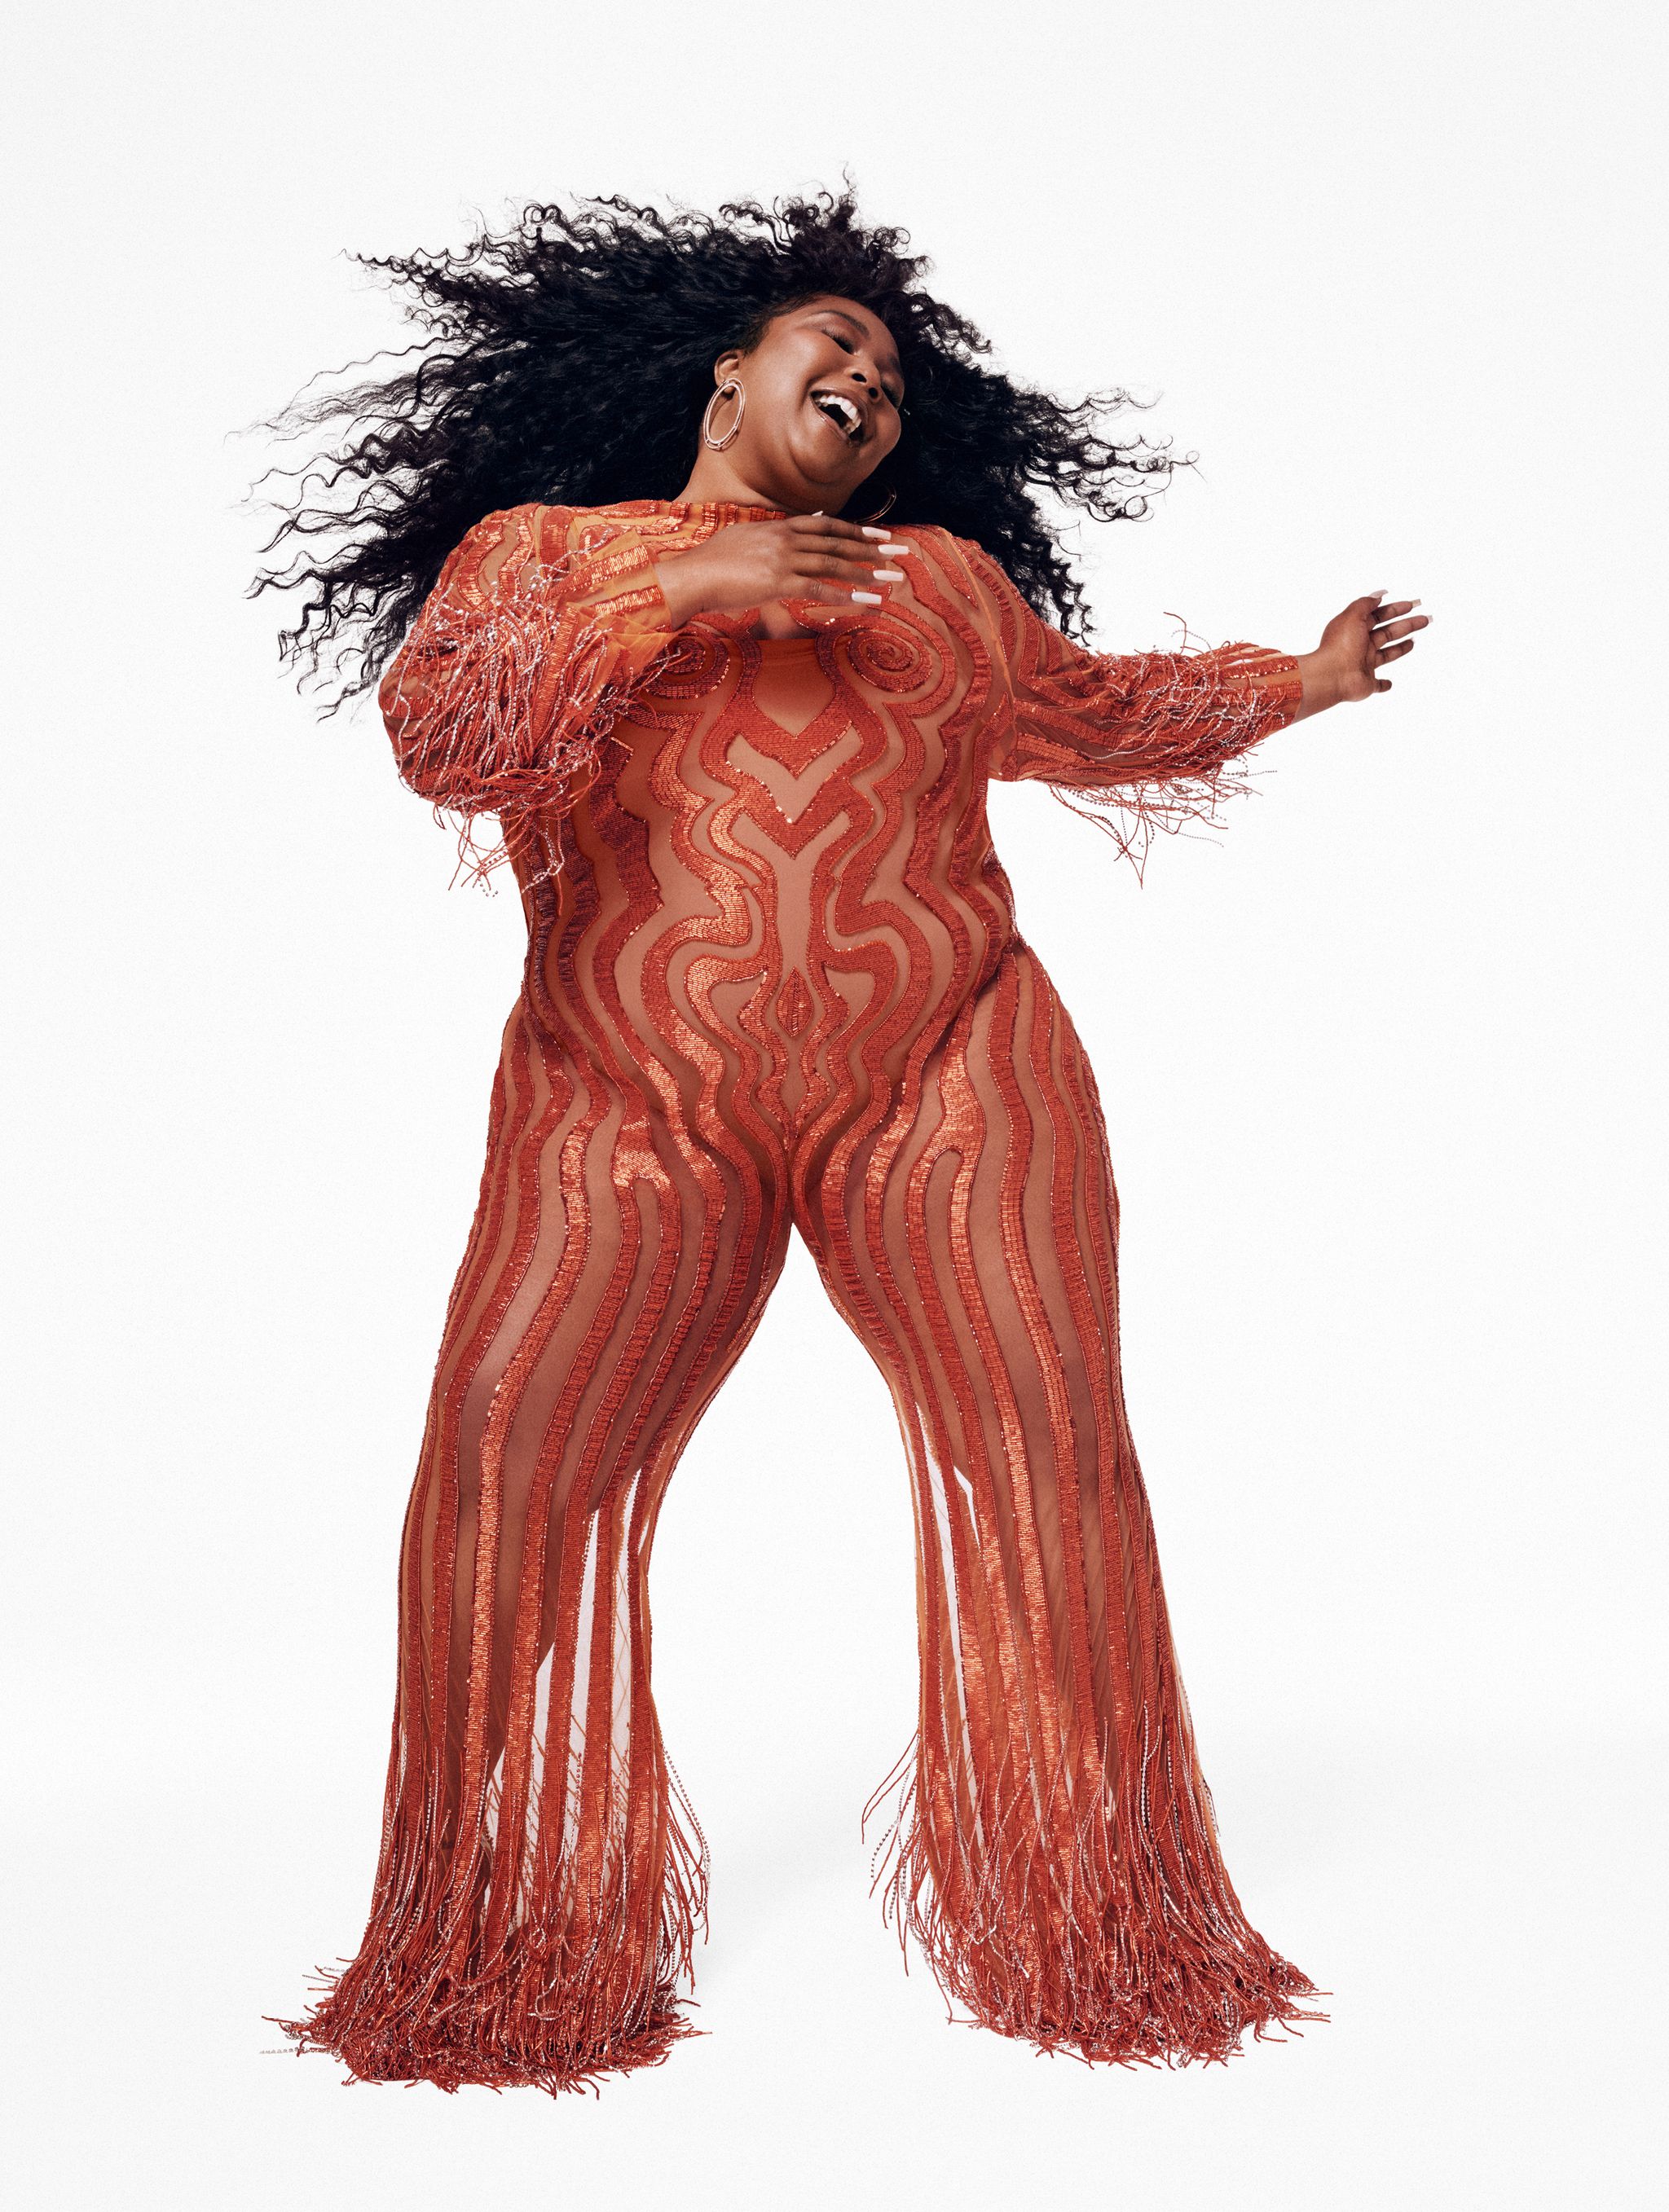 Lizzo claims new shapewear collection 'snatches and lifts' the